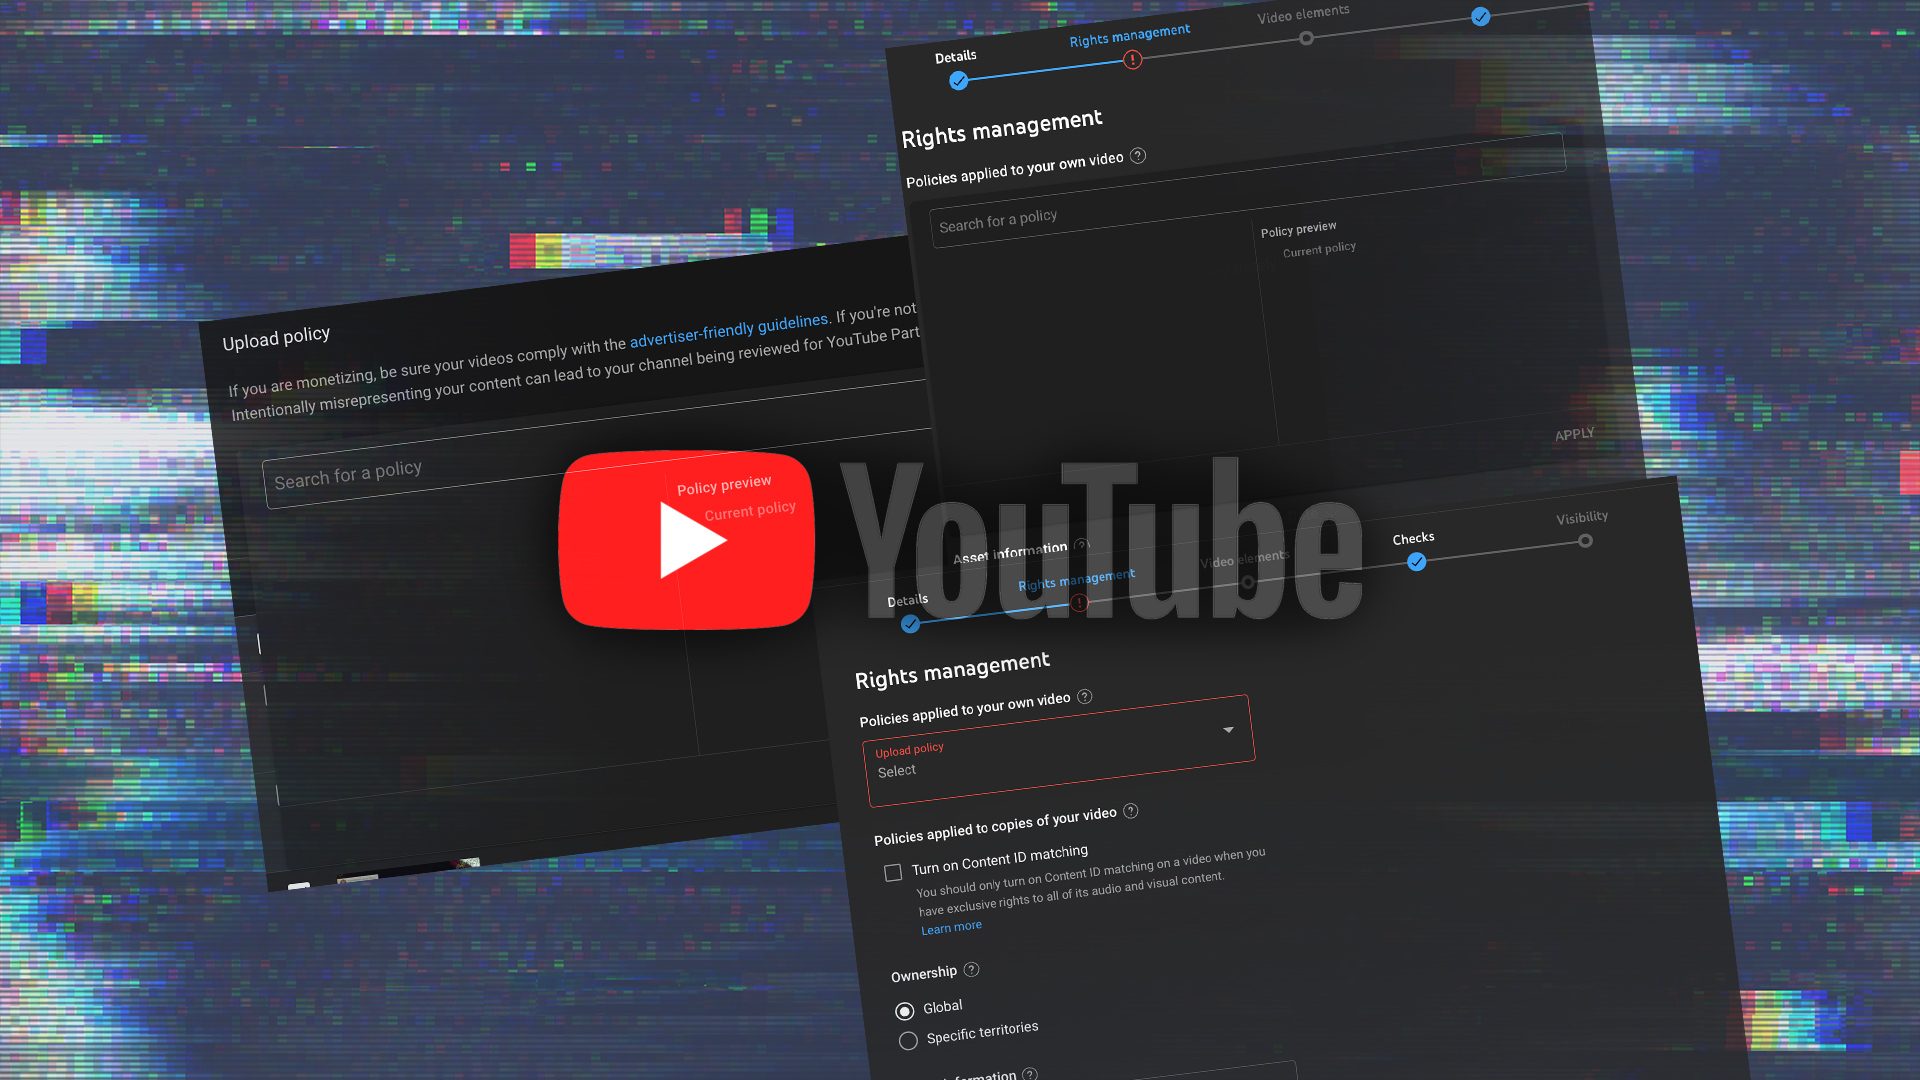 YouTube encounters video publishing issues due to rights management bug